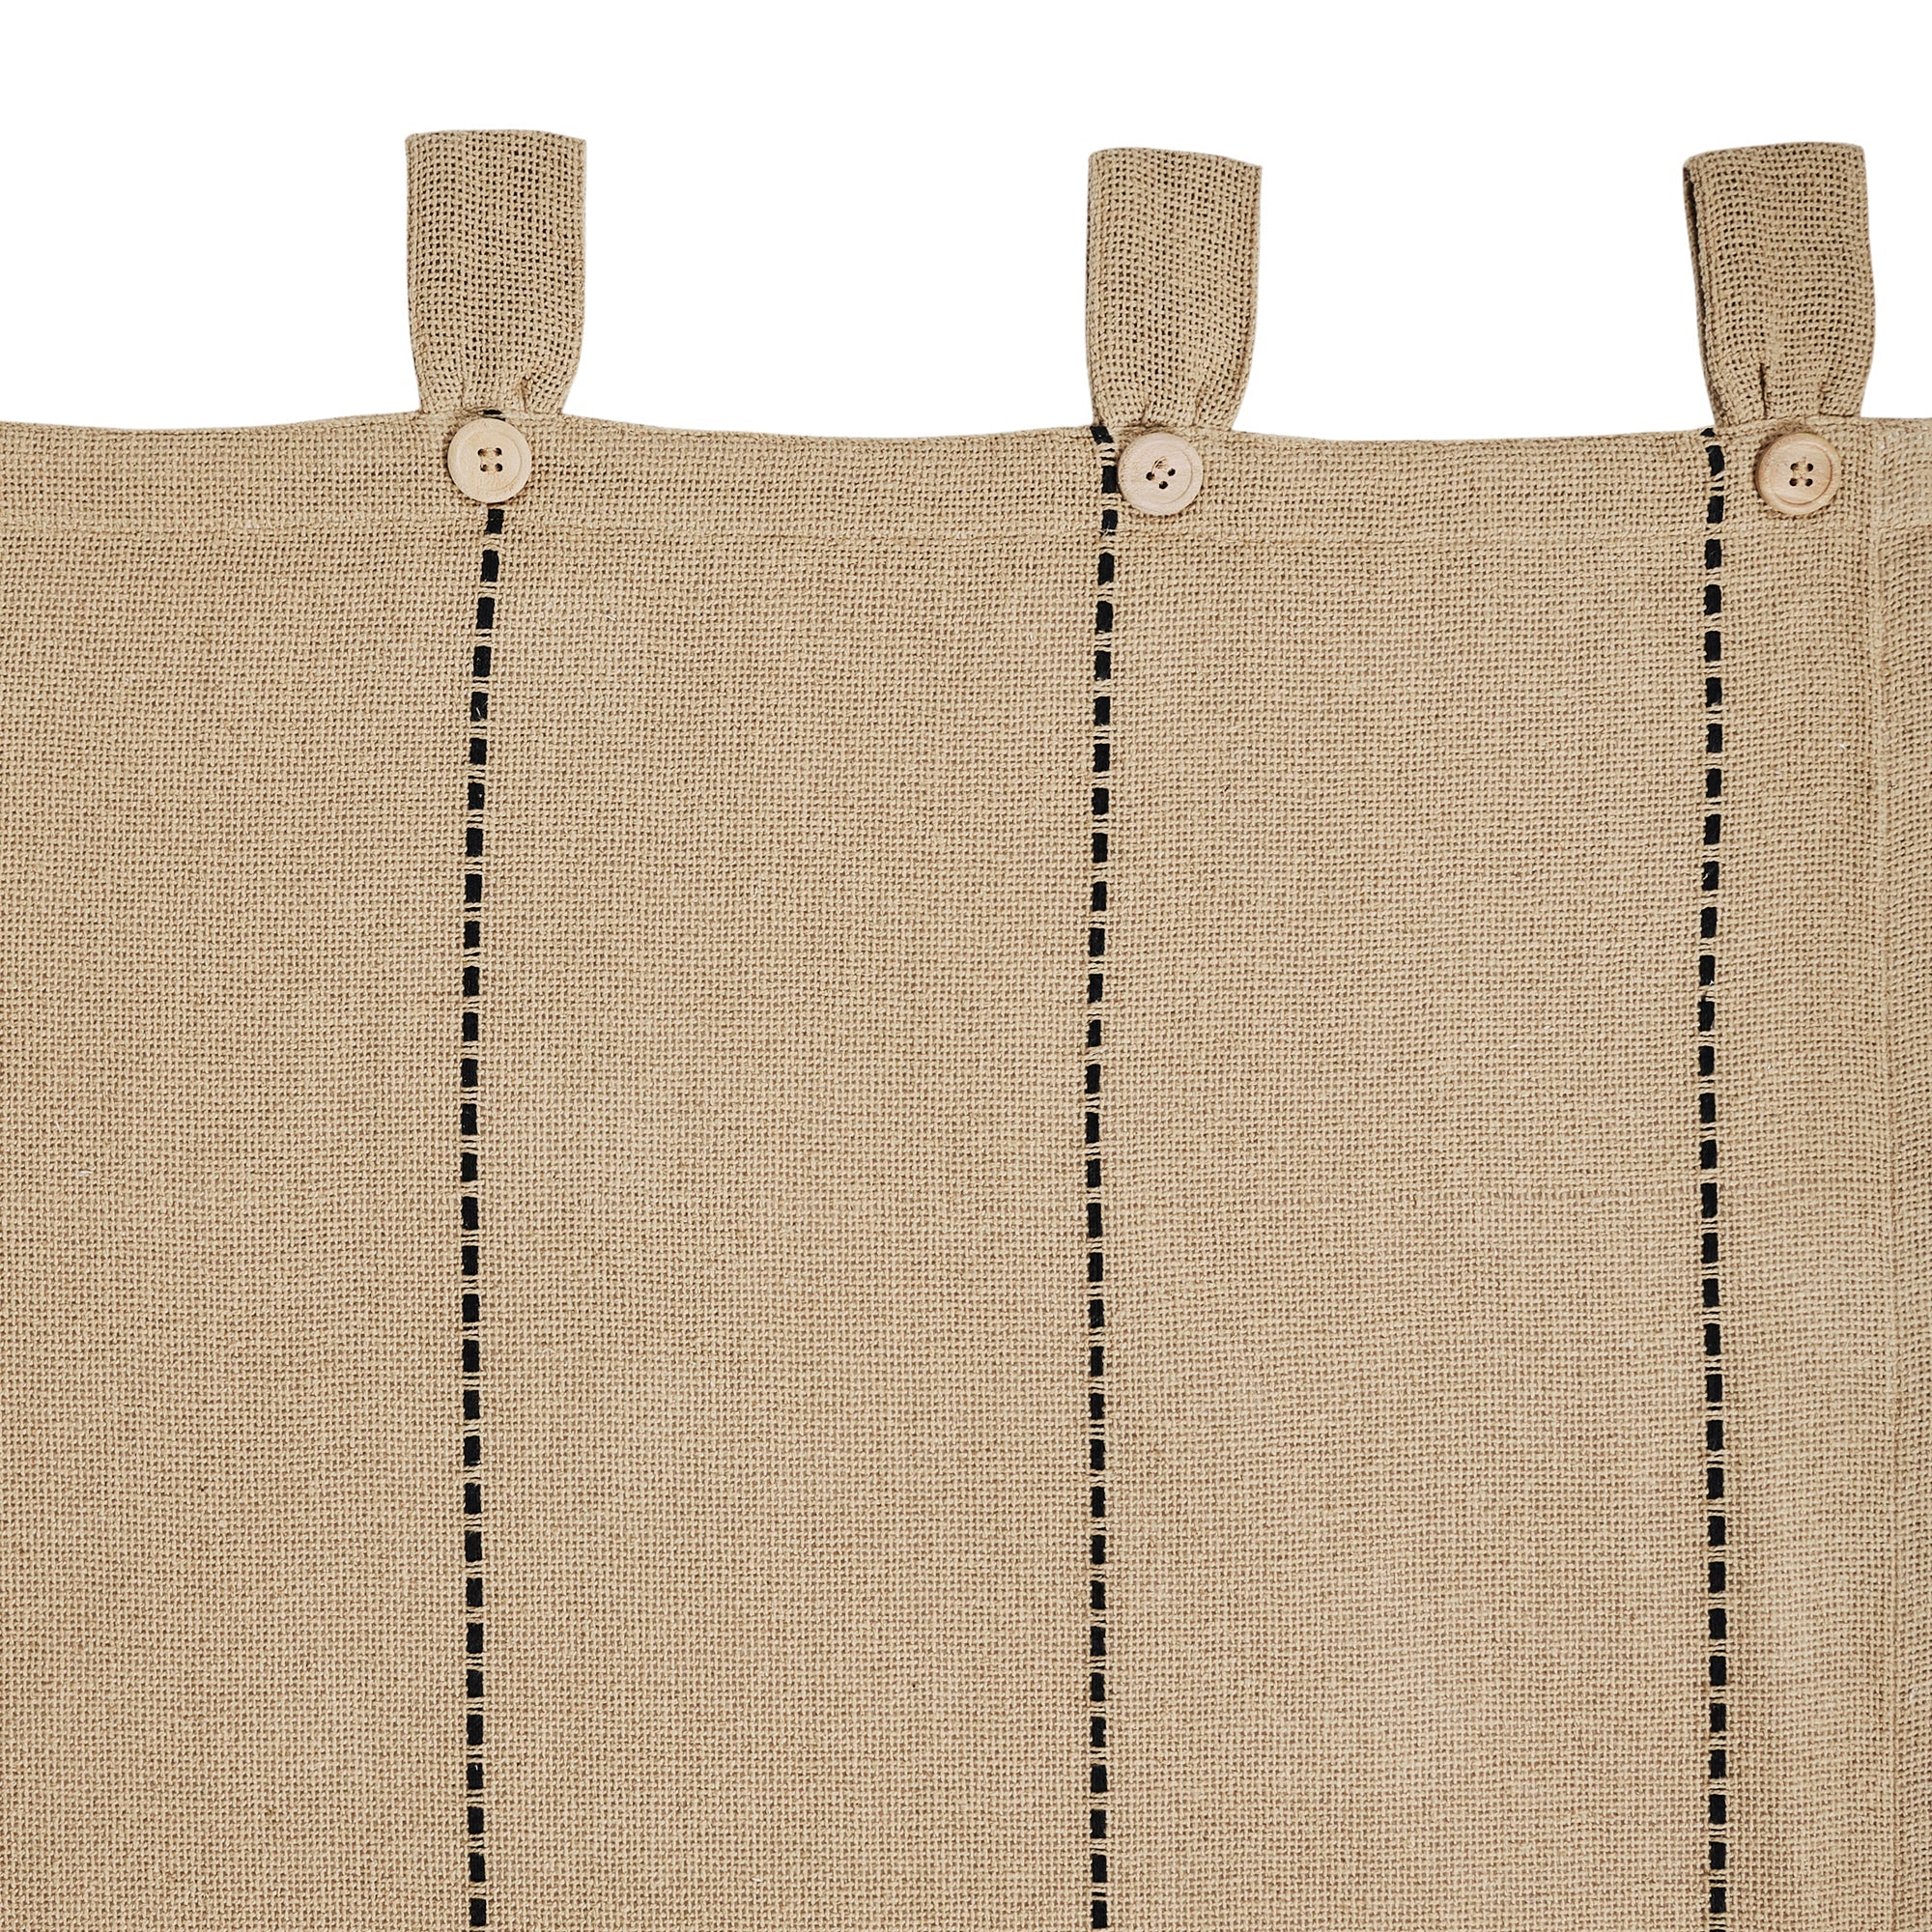 Stitched Burlap Natural Panel Curtain Set of 2 84x40 VHC Brands